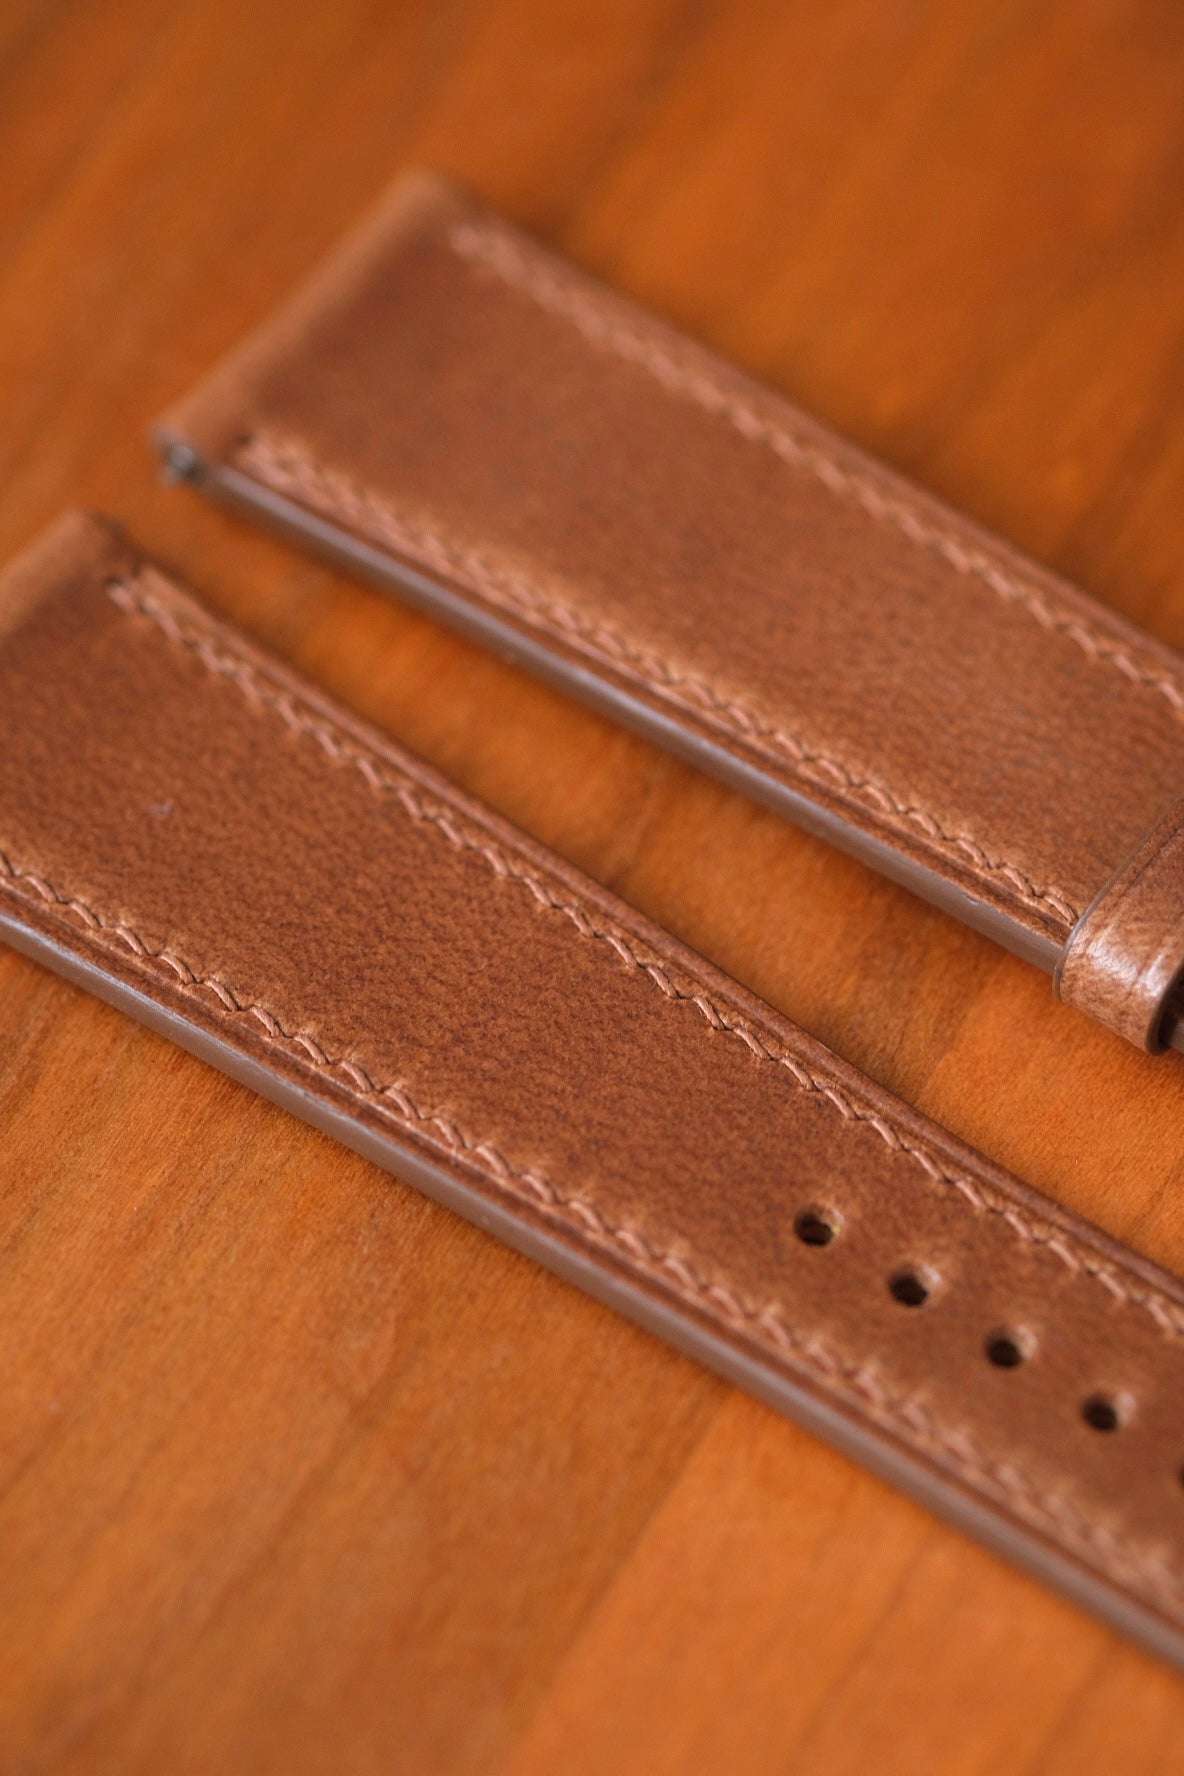 Natural Horween Chromexcel Leather Strap - Artisan Straps